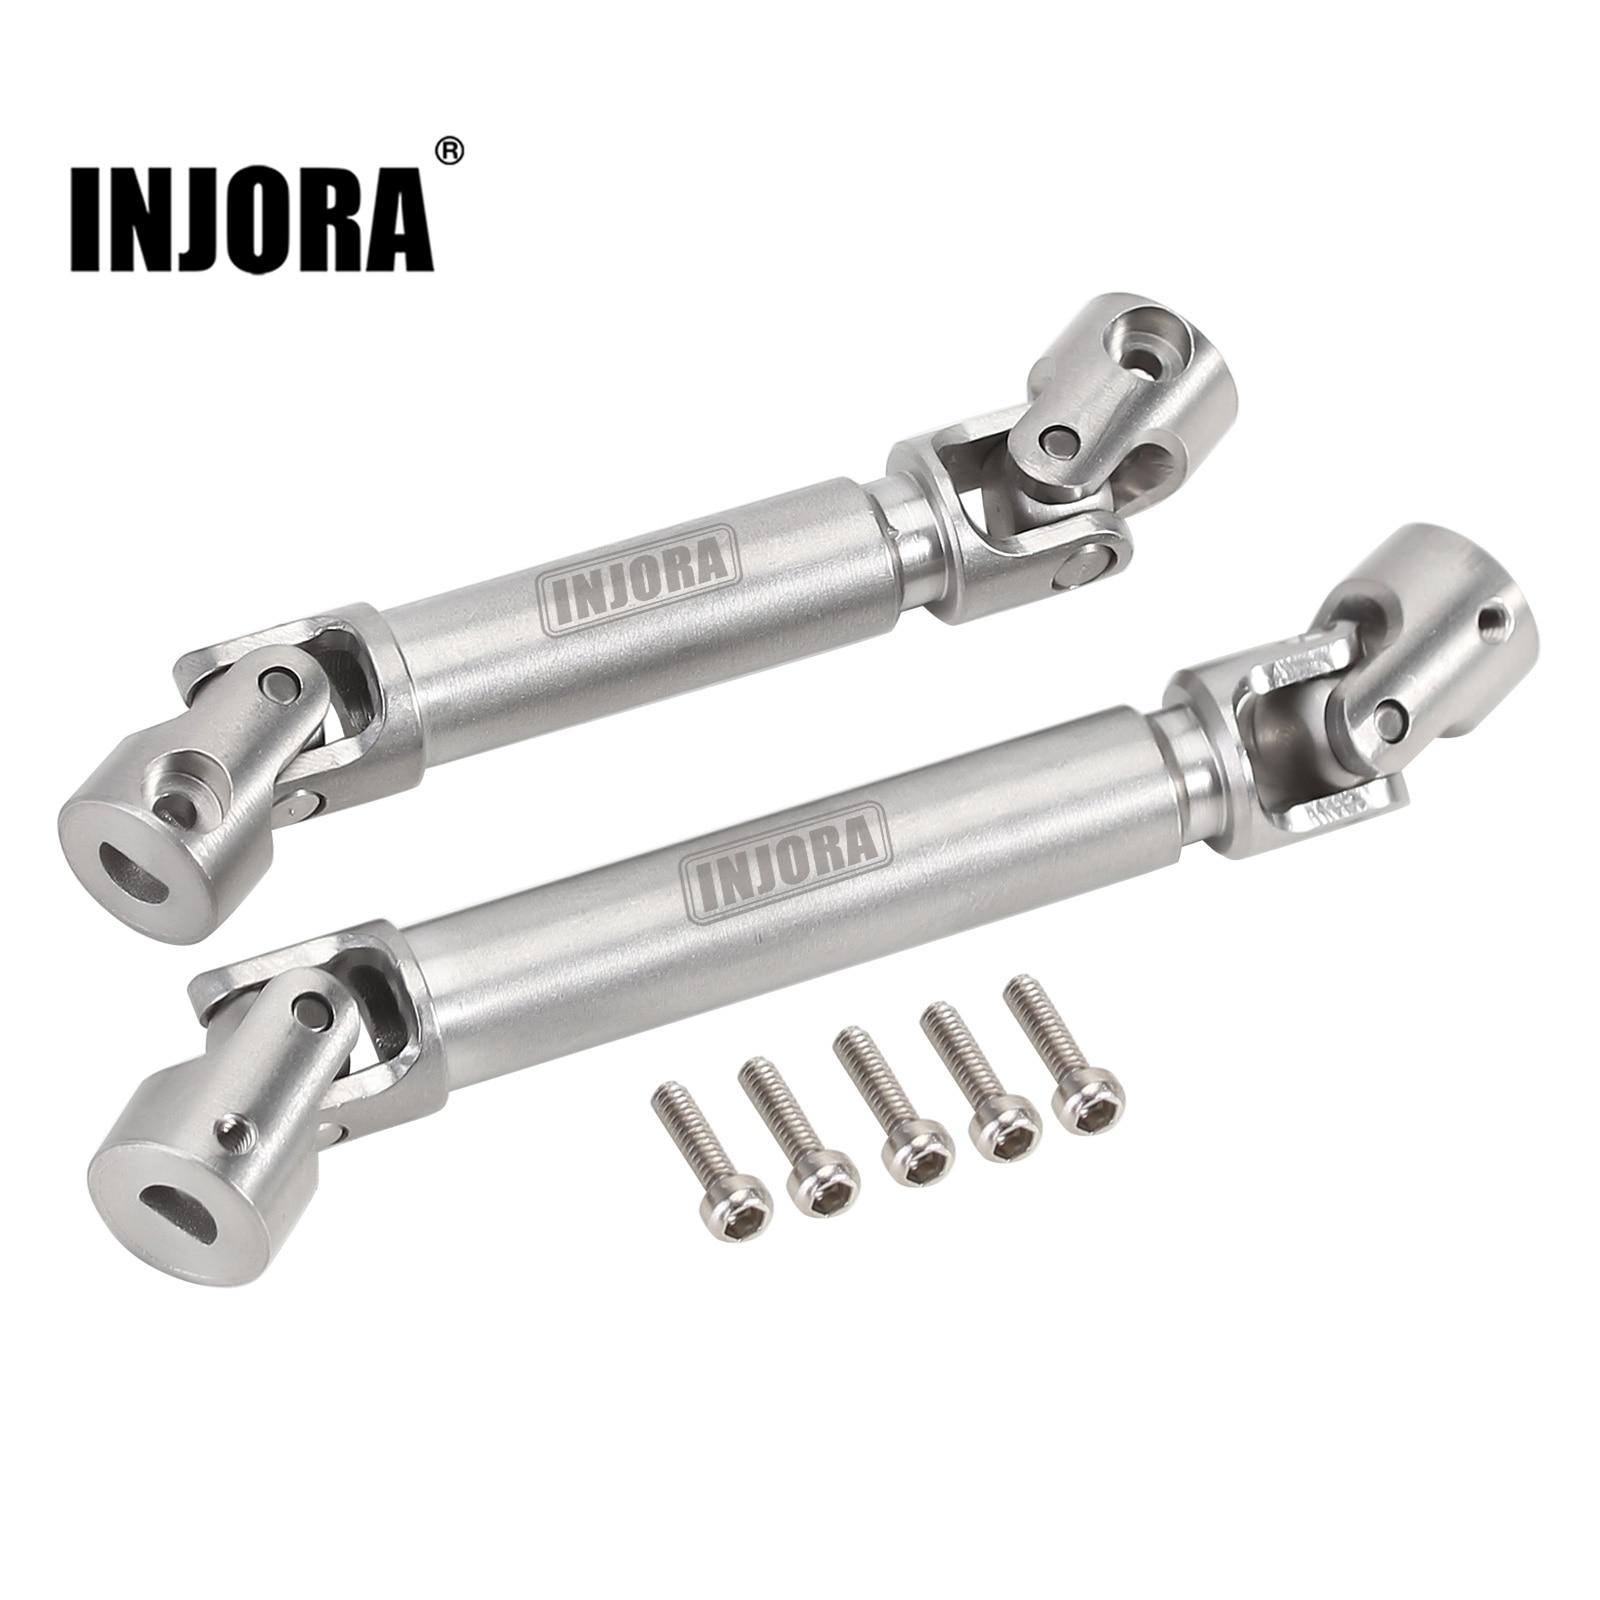 INJORA-Stainless-Steel-Center-Drive-Shaft-D-Shaped-Hole-For-1-24-RC-Crawler-Axial-SCX24.jpg